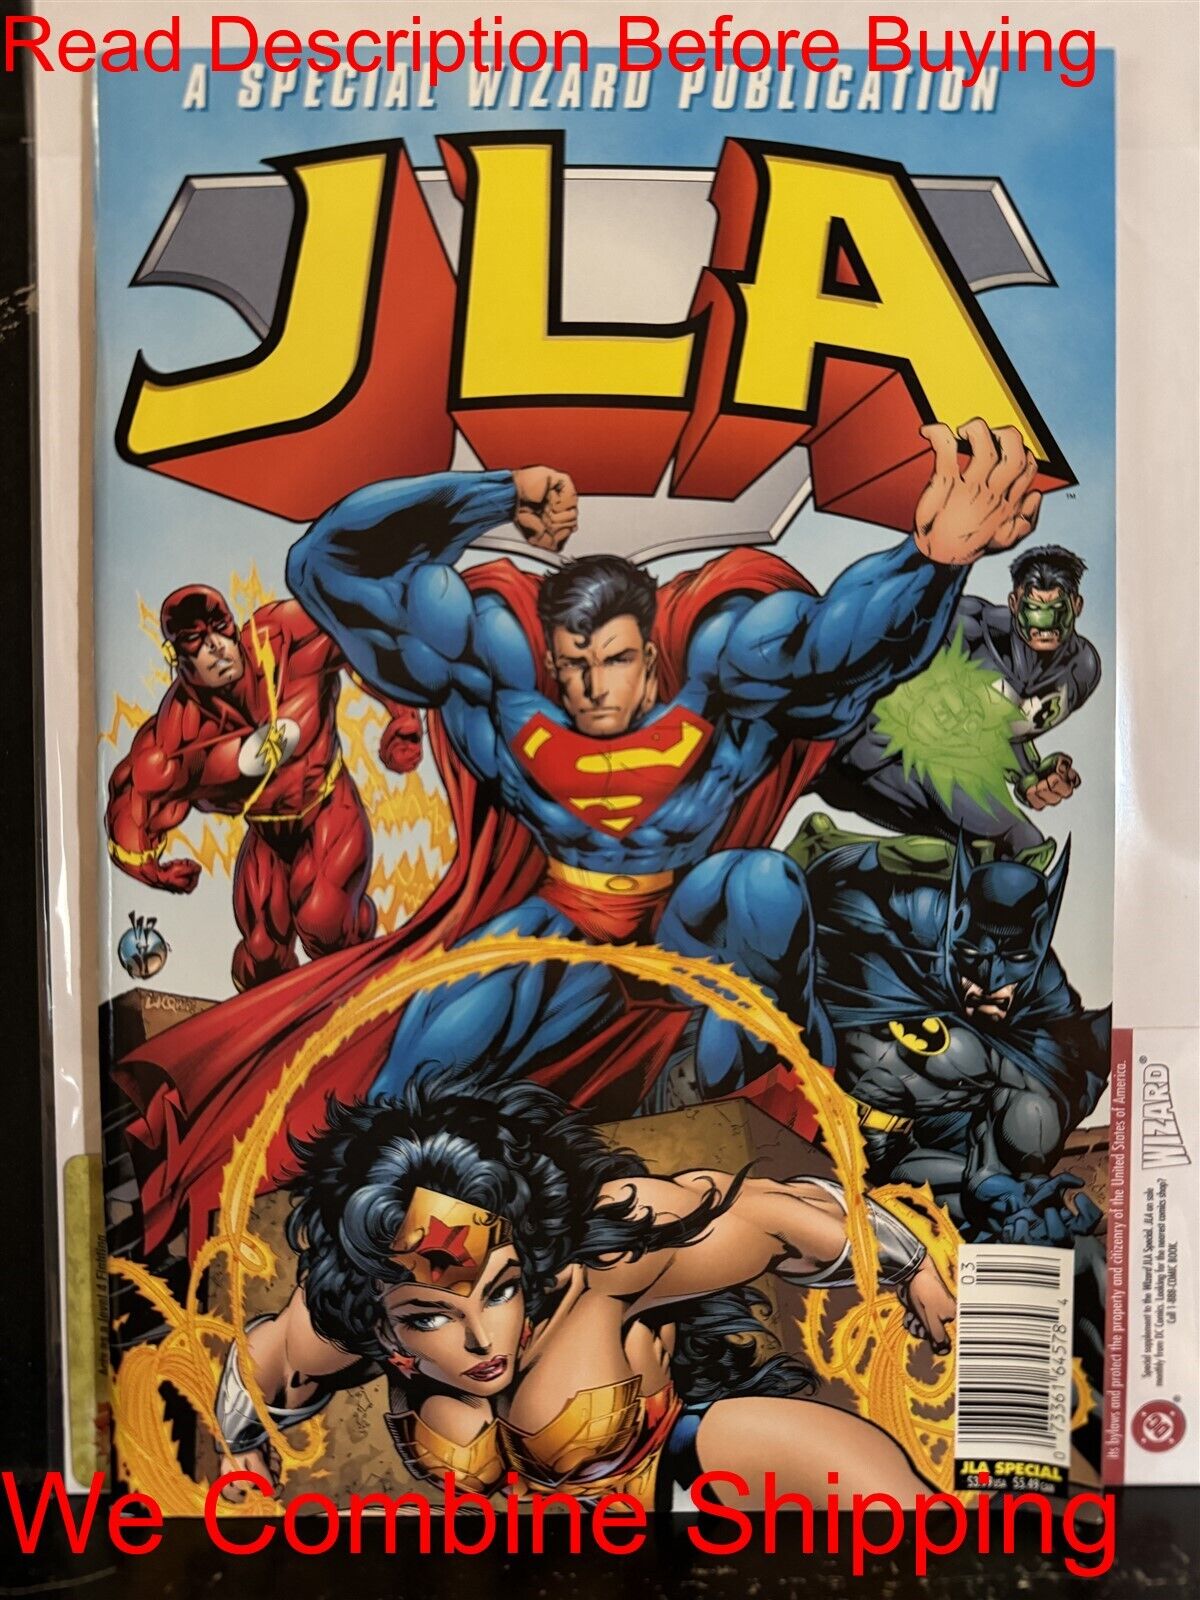 BARGAIN BOOKS ($5 MIN PURCHASE) Wizard JLA Special (1997) Free Combine Shipping